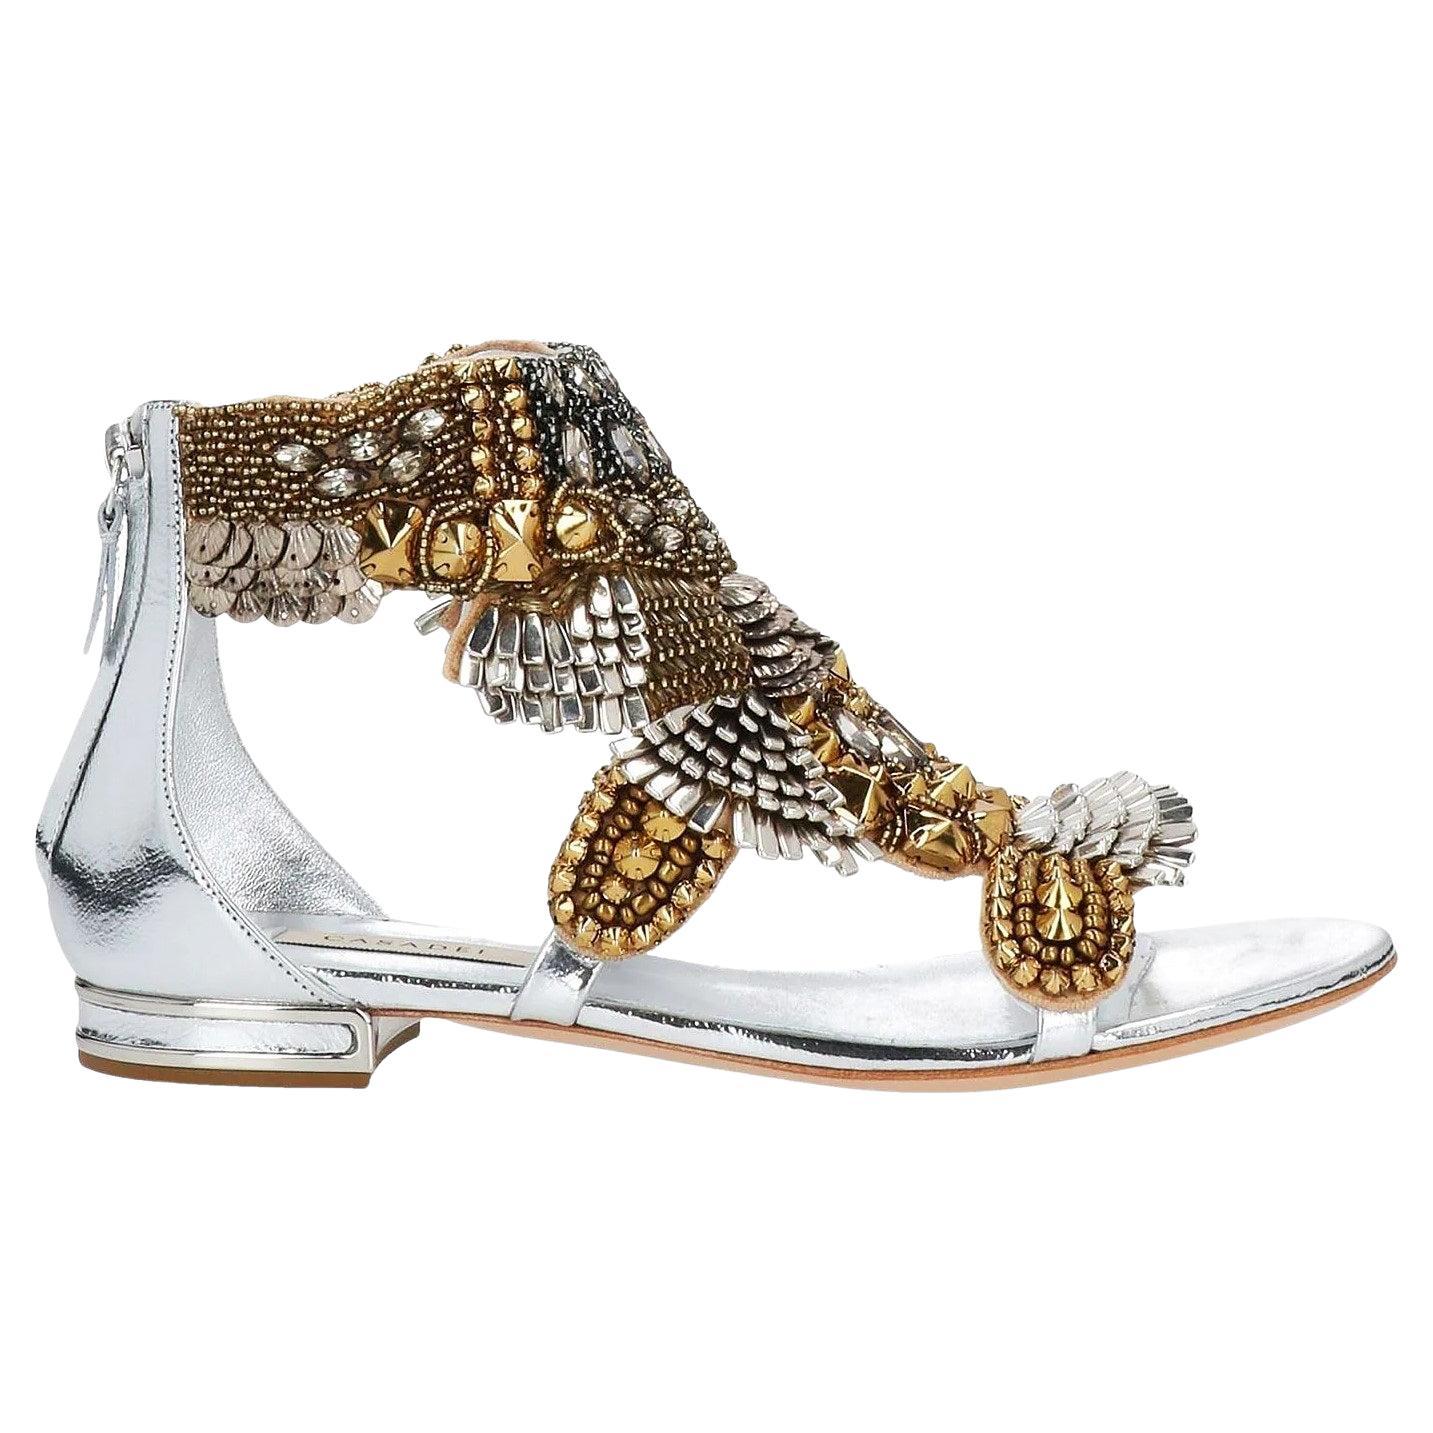 New $2100 Casadei Leather Gold Silver Studded Embellished Flat Sandals It 36 - 6